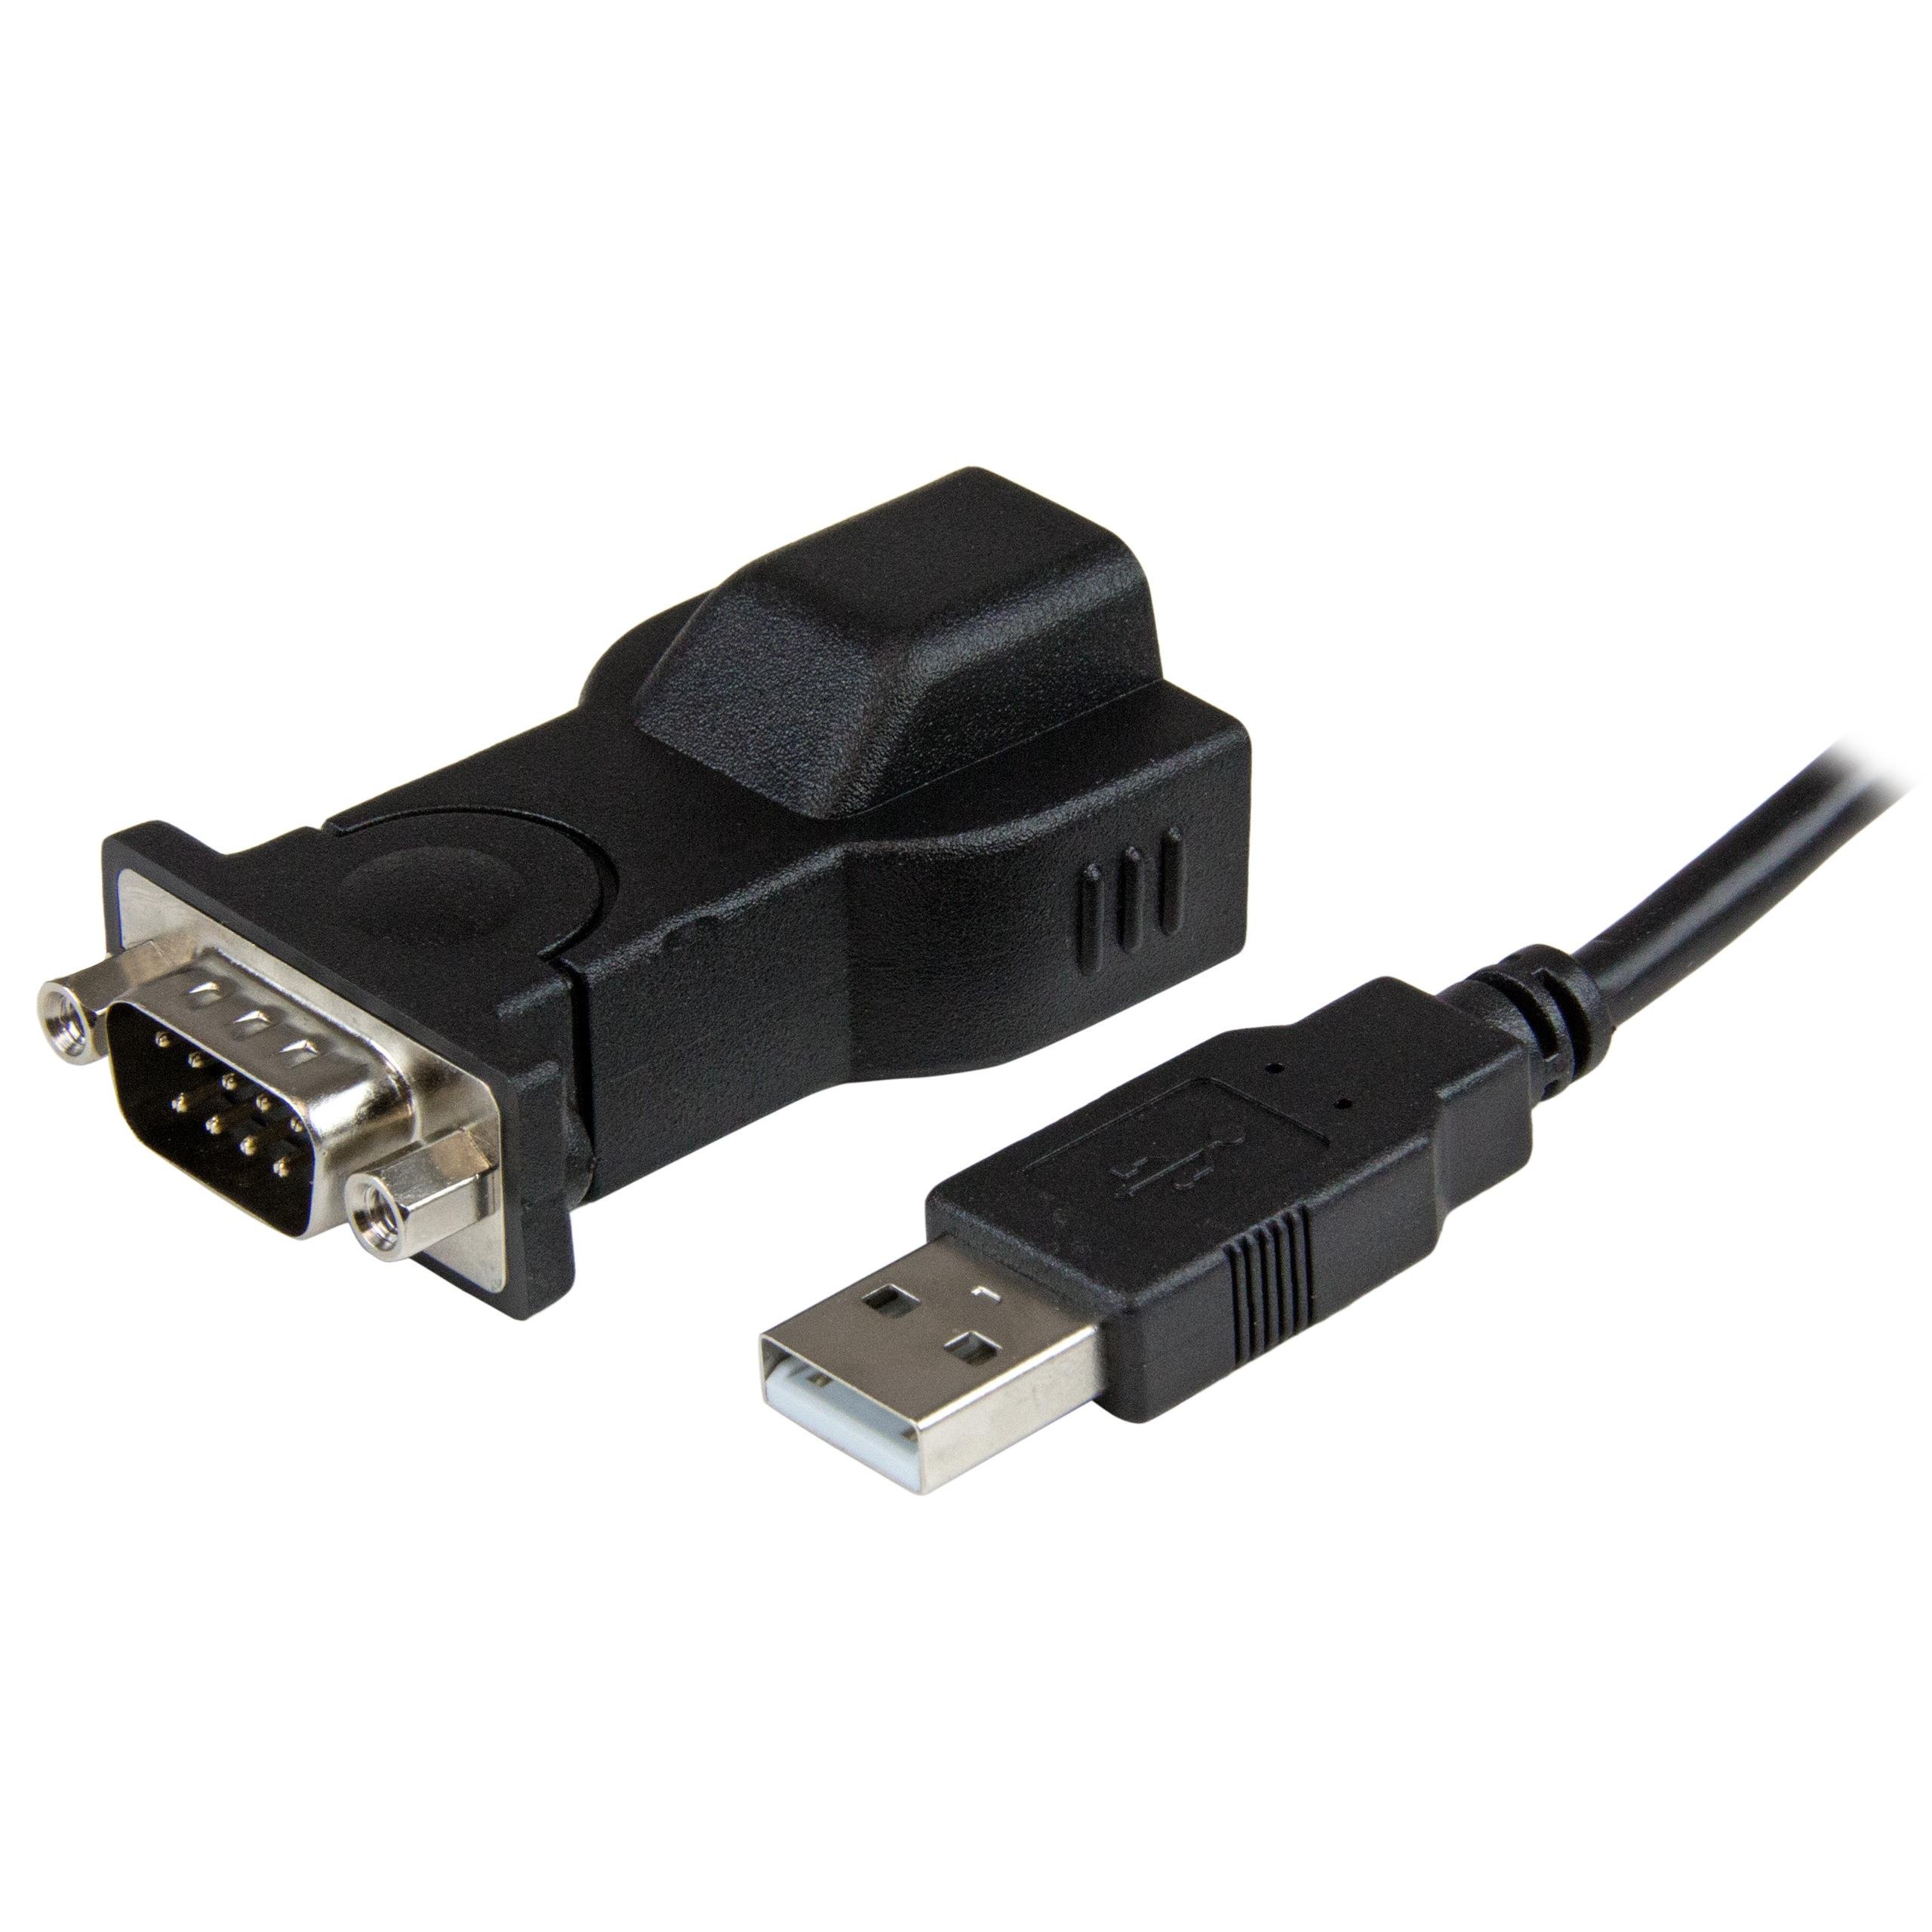 pl-2303 usb-to-serial port adapter pinout